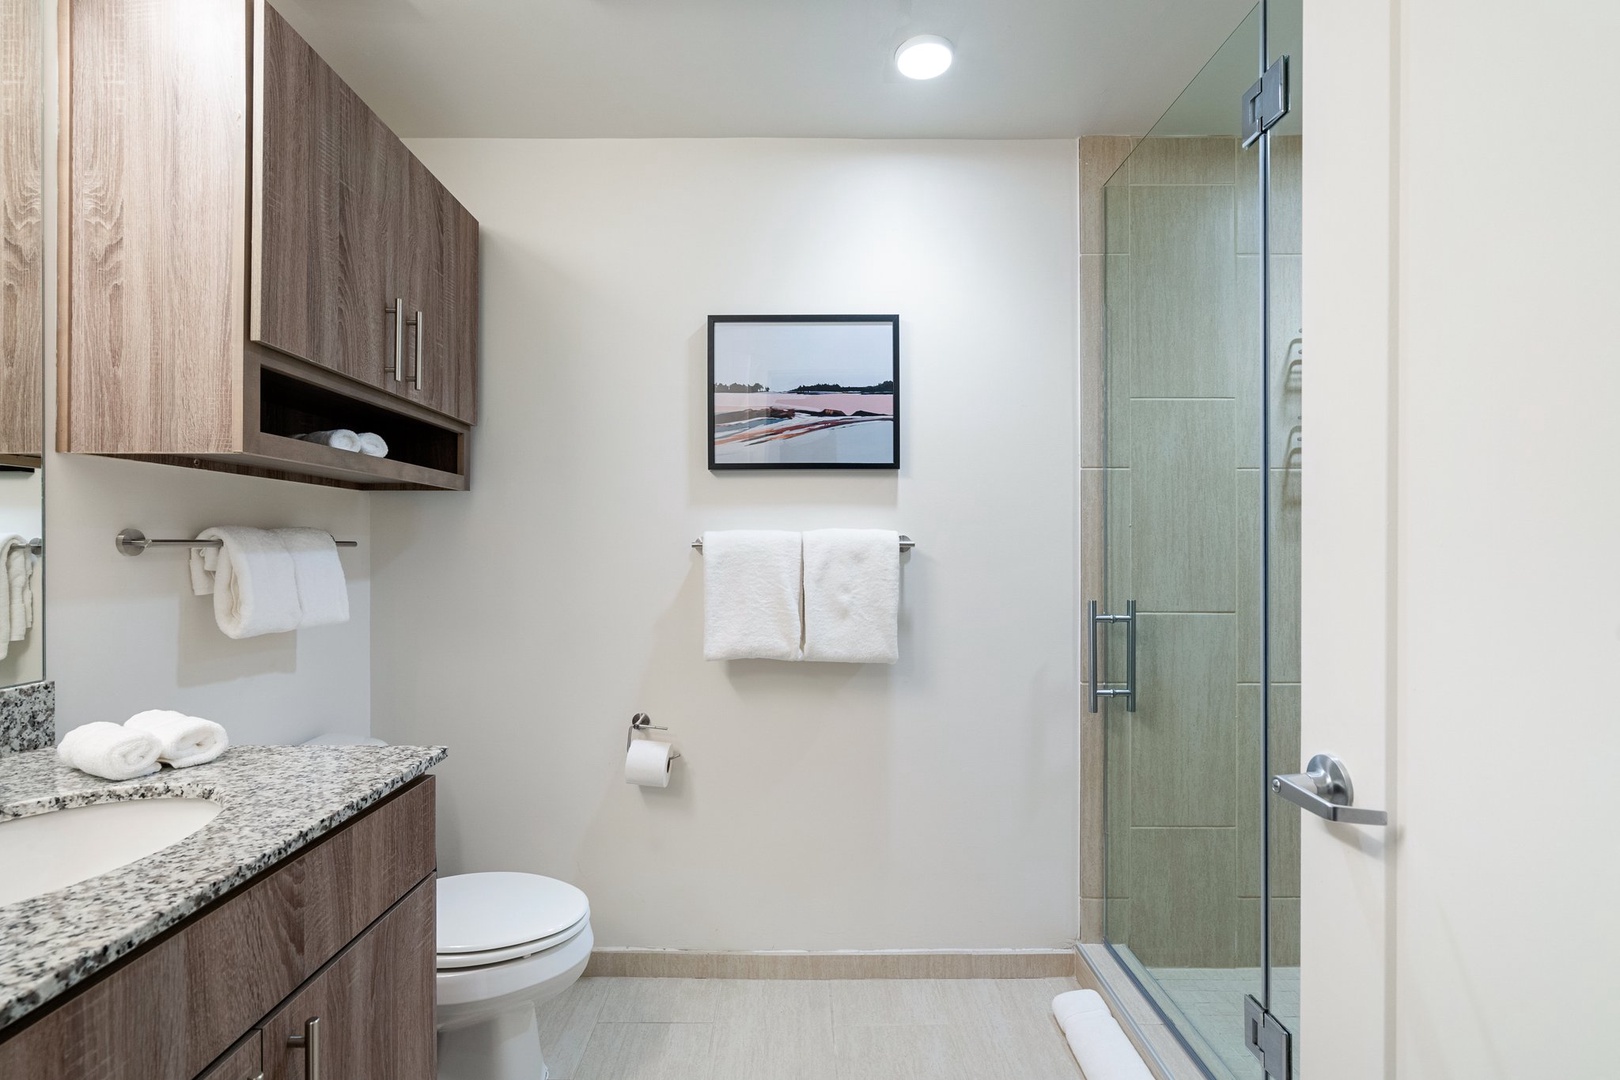 Freshen up in a spacious bathroom with ample storage and a walk-in shower, MALIN+GOETZ toiletries, plush bath towels, pool towels, a hairdryer, and hair straightener / flat iron.